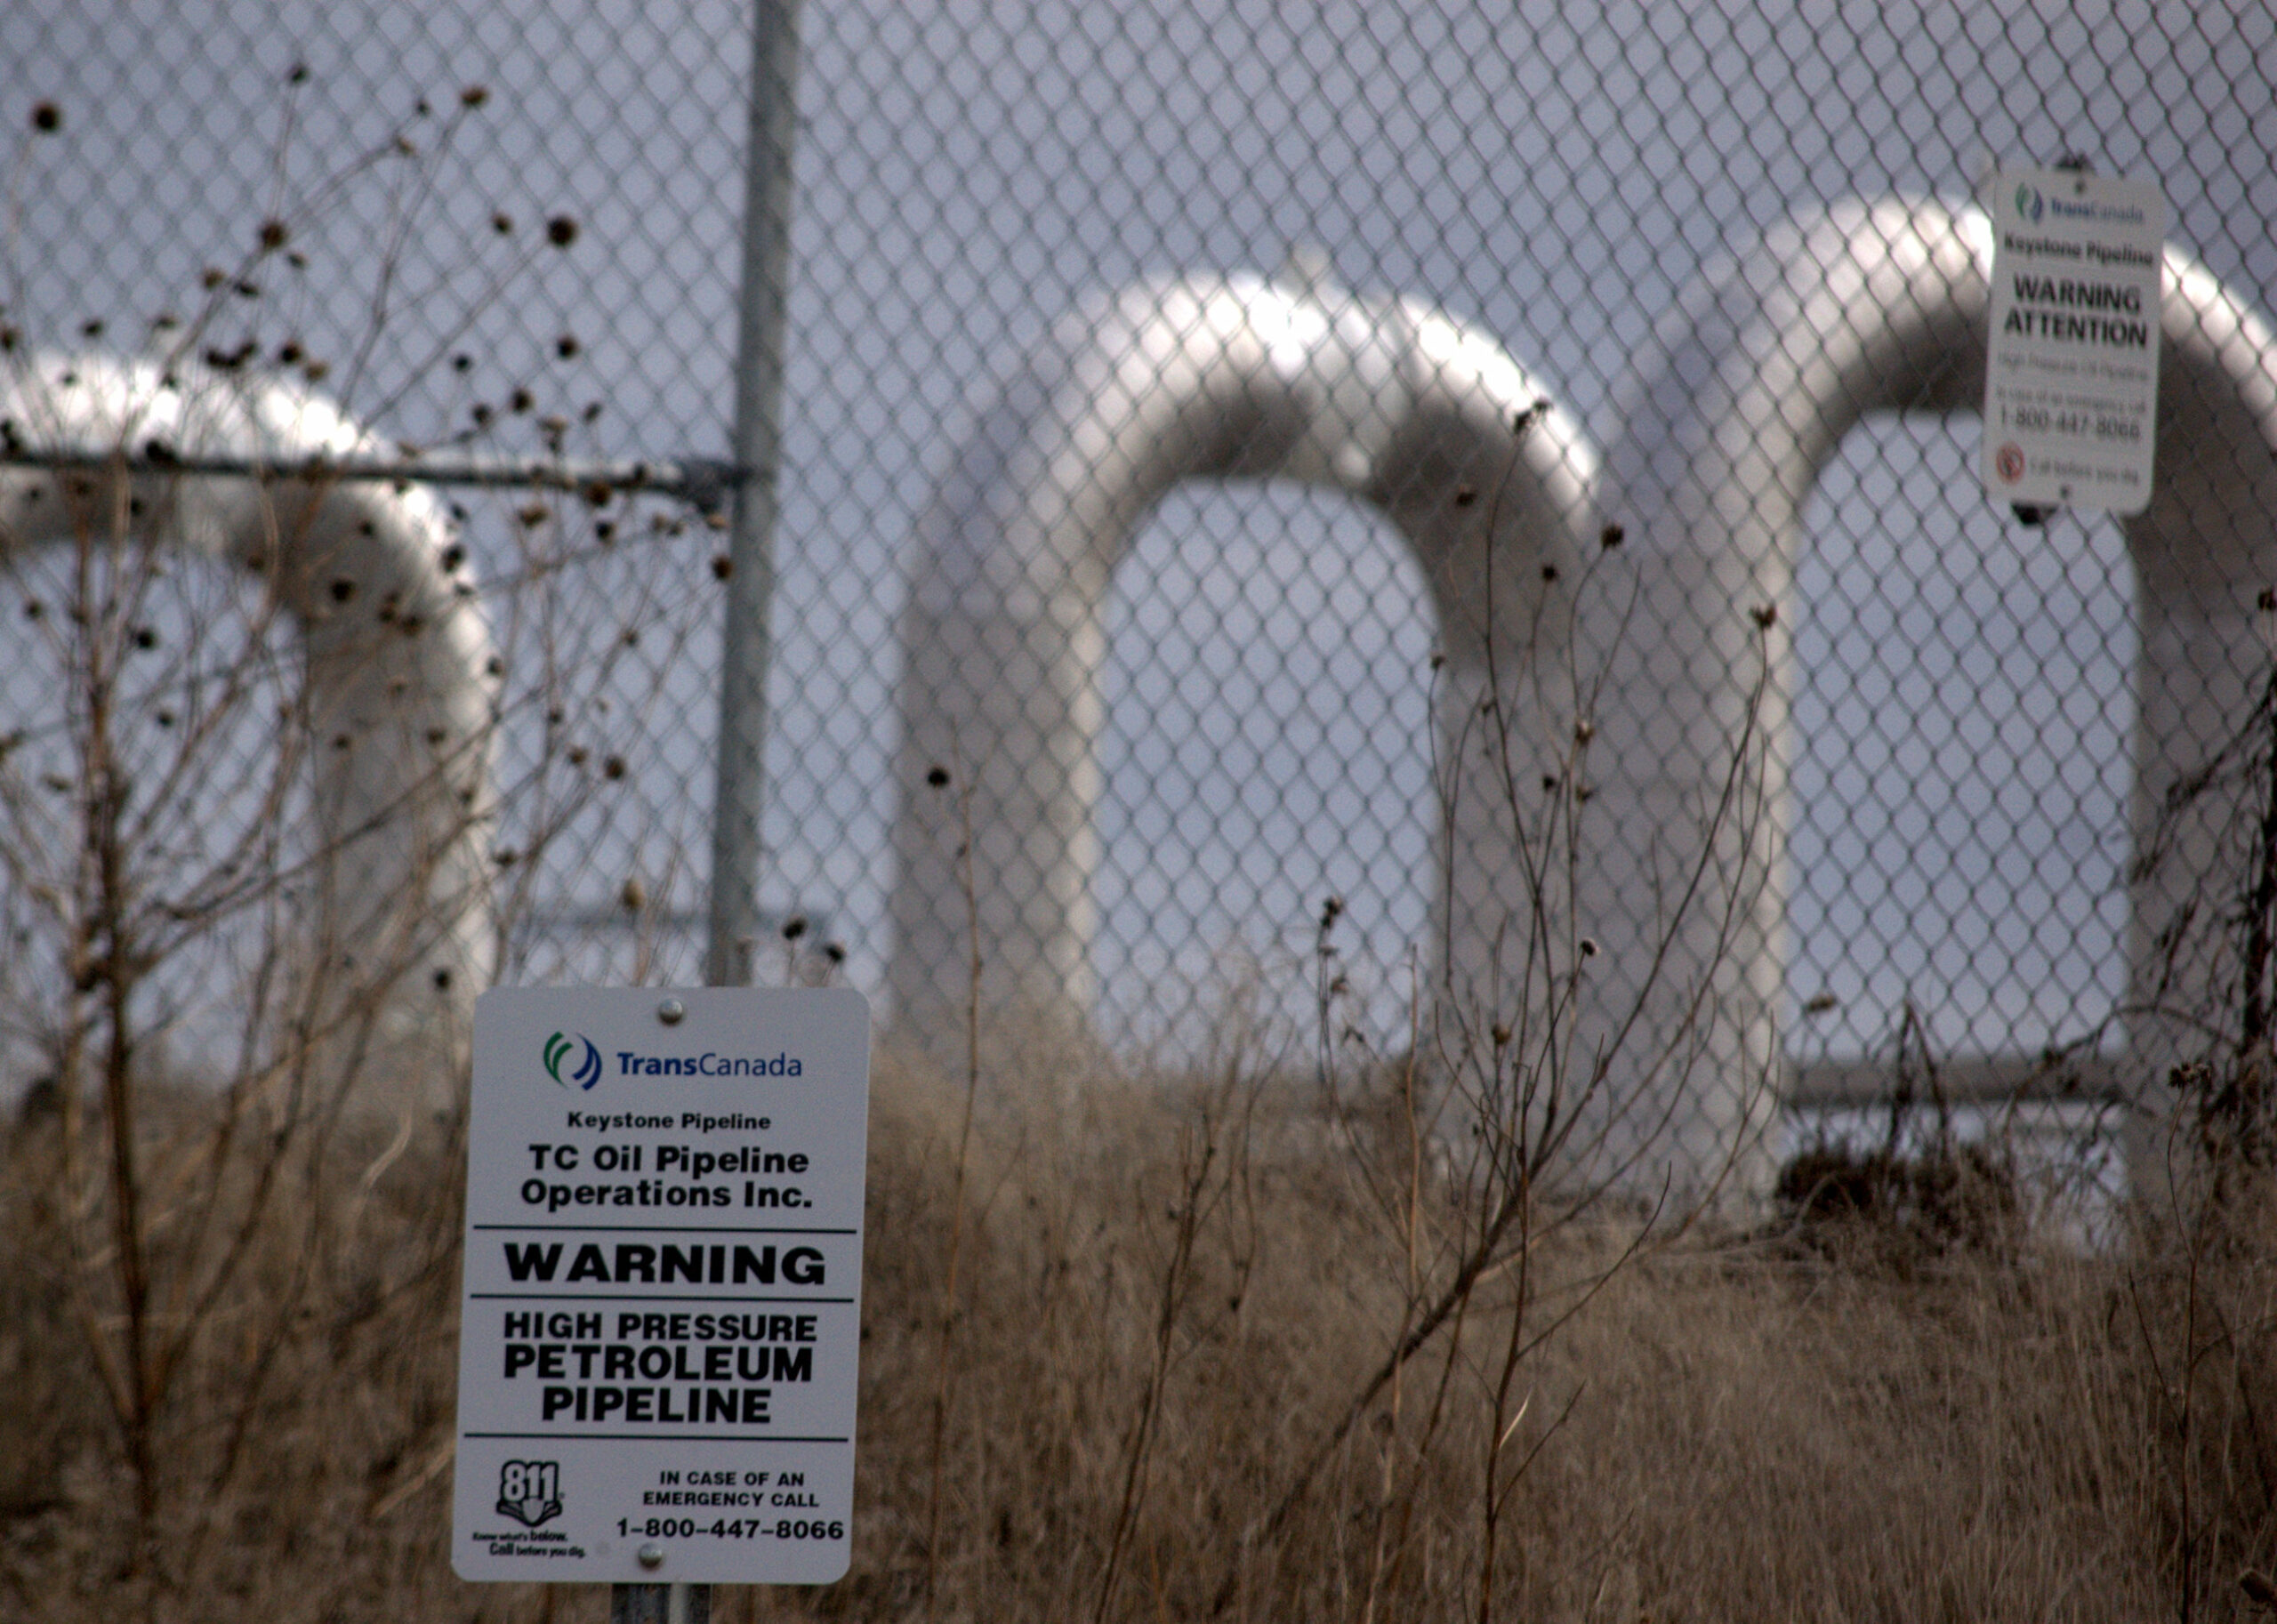 The Keystone pipeline just spilled another 210,000 gallons of oil